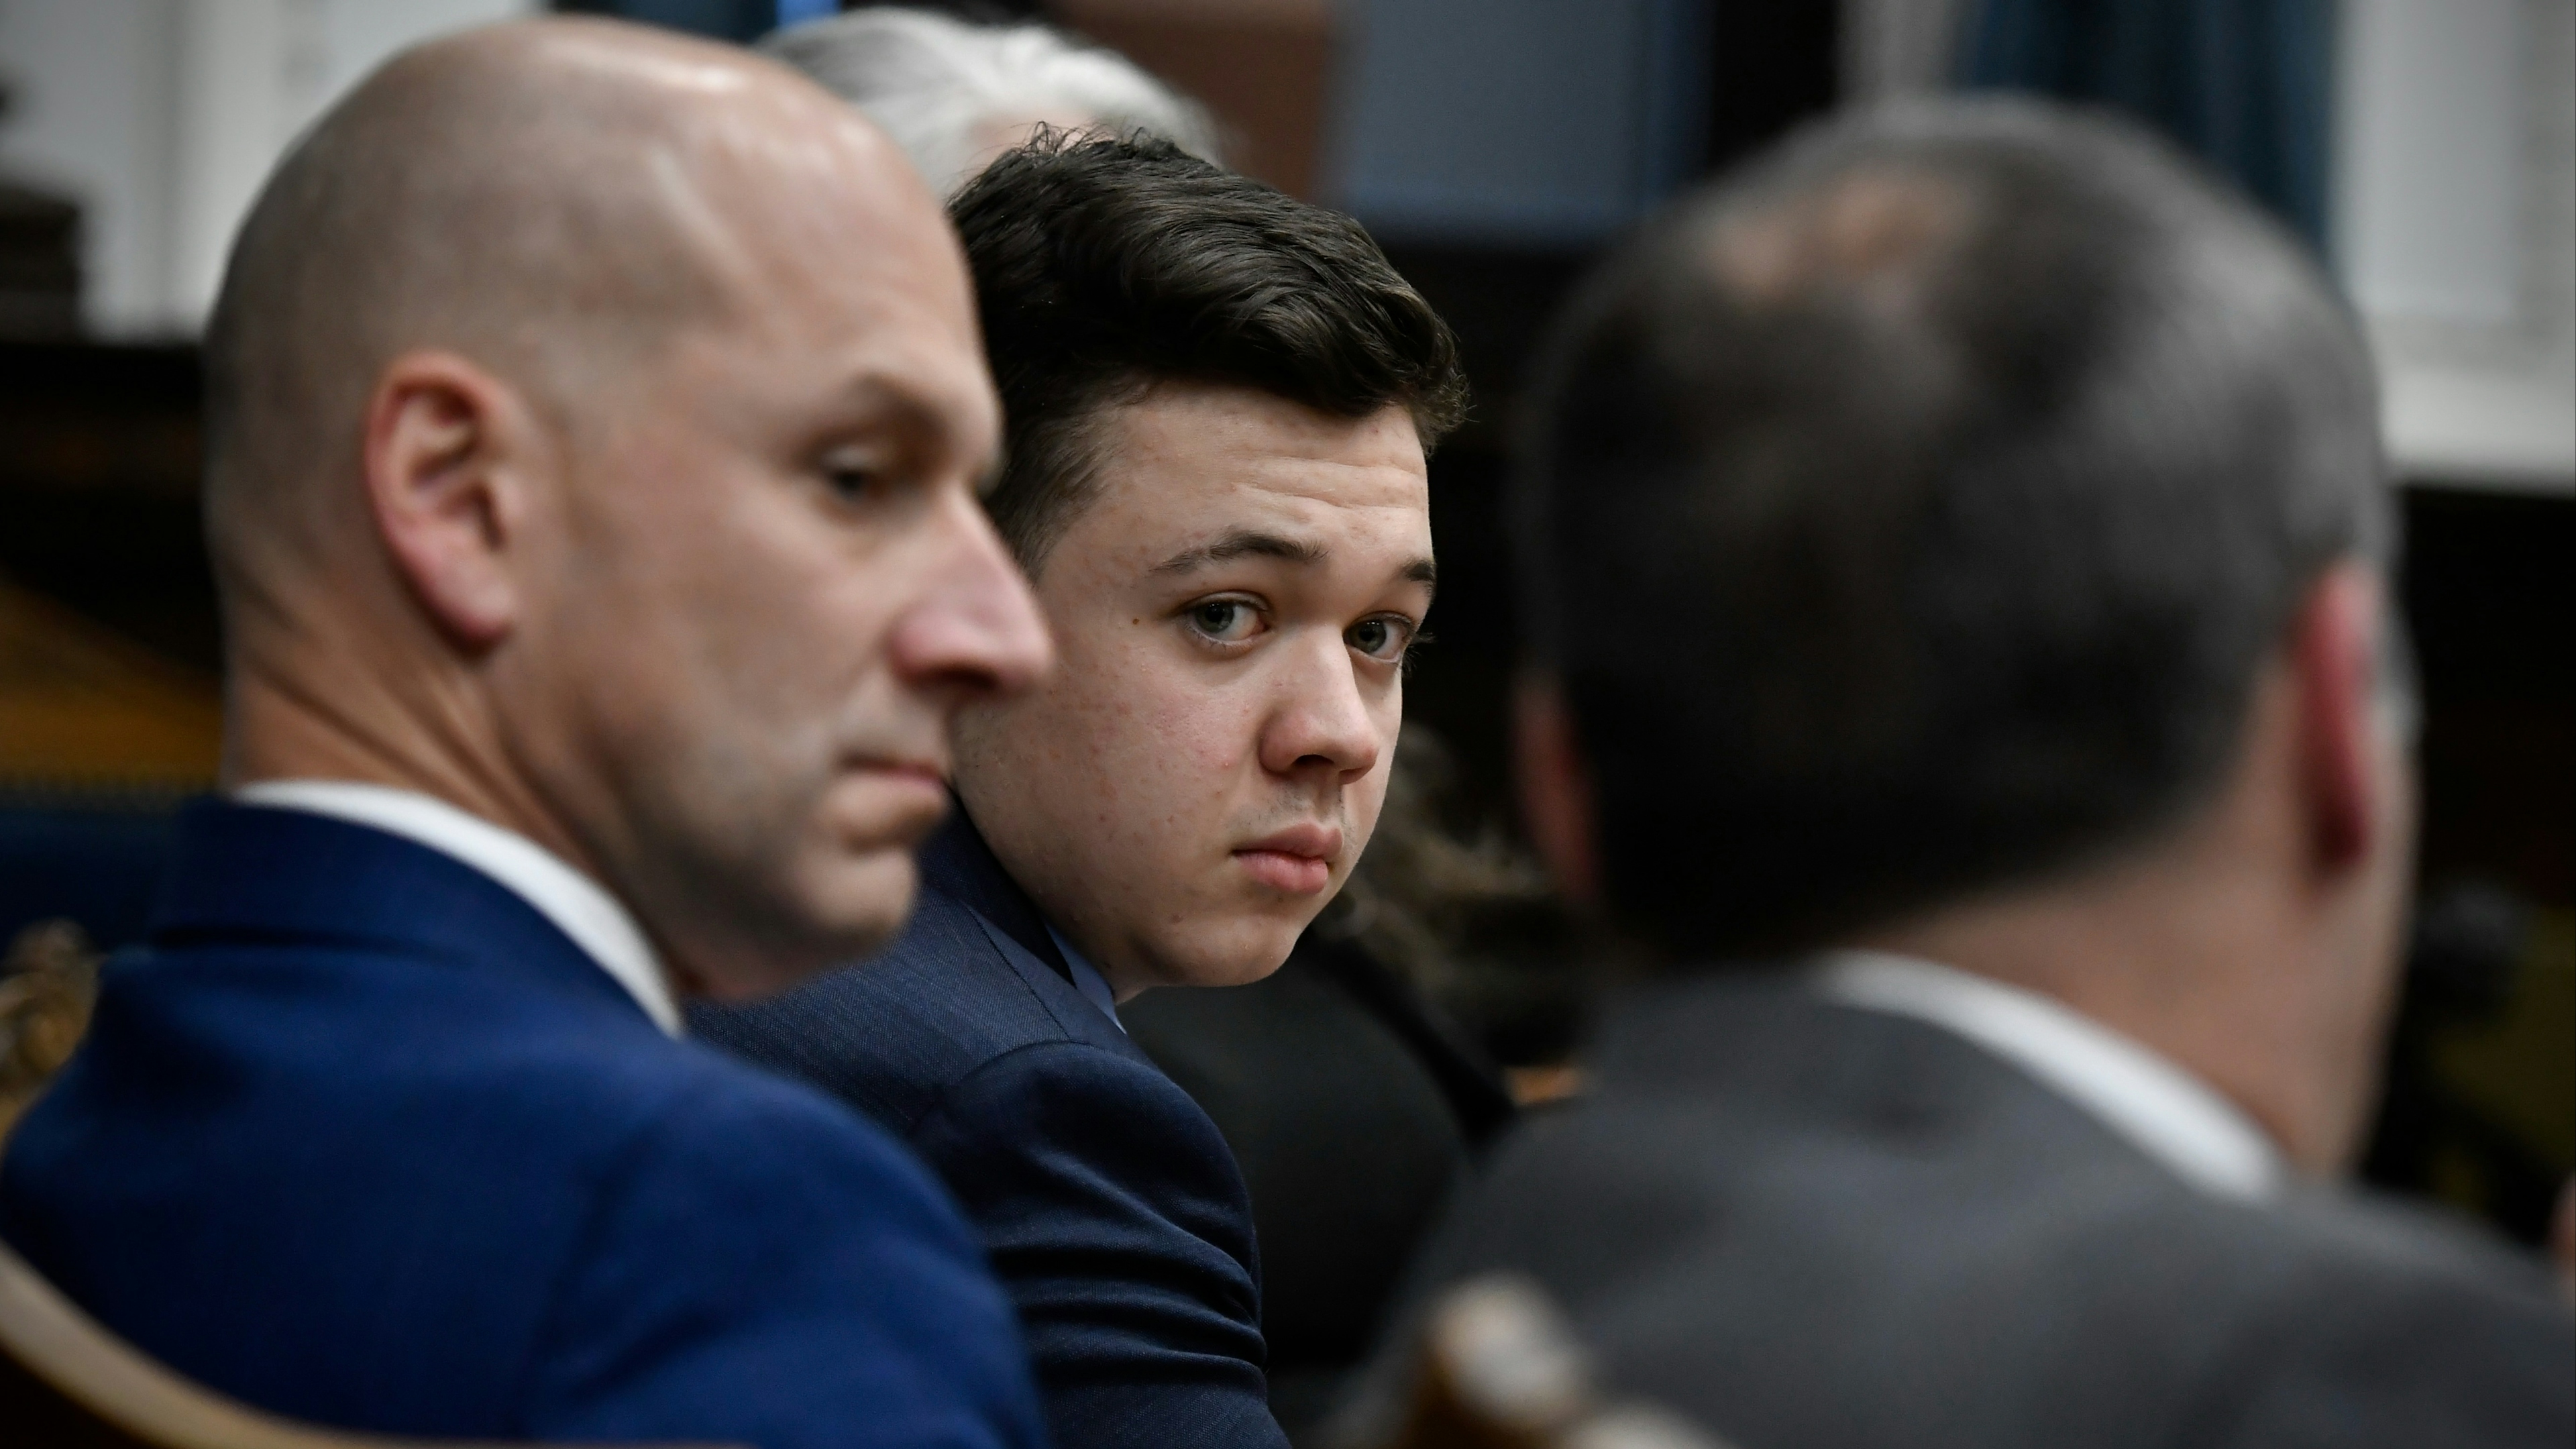 Kyle Rittenhouse, center, looks over to his attorneys as the jury is dismissed for the day during his trial 